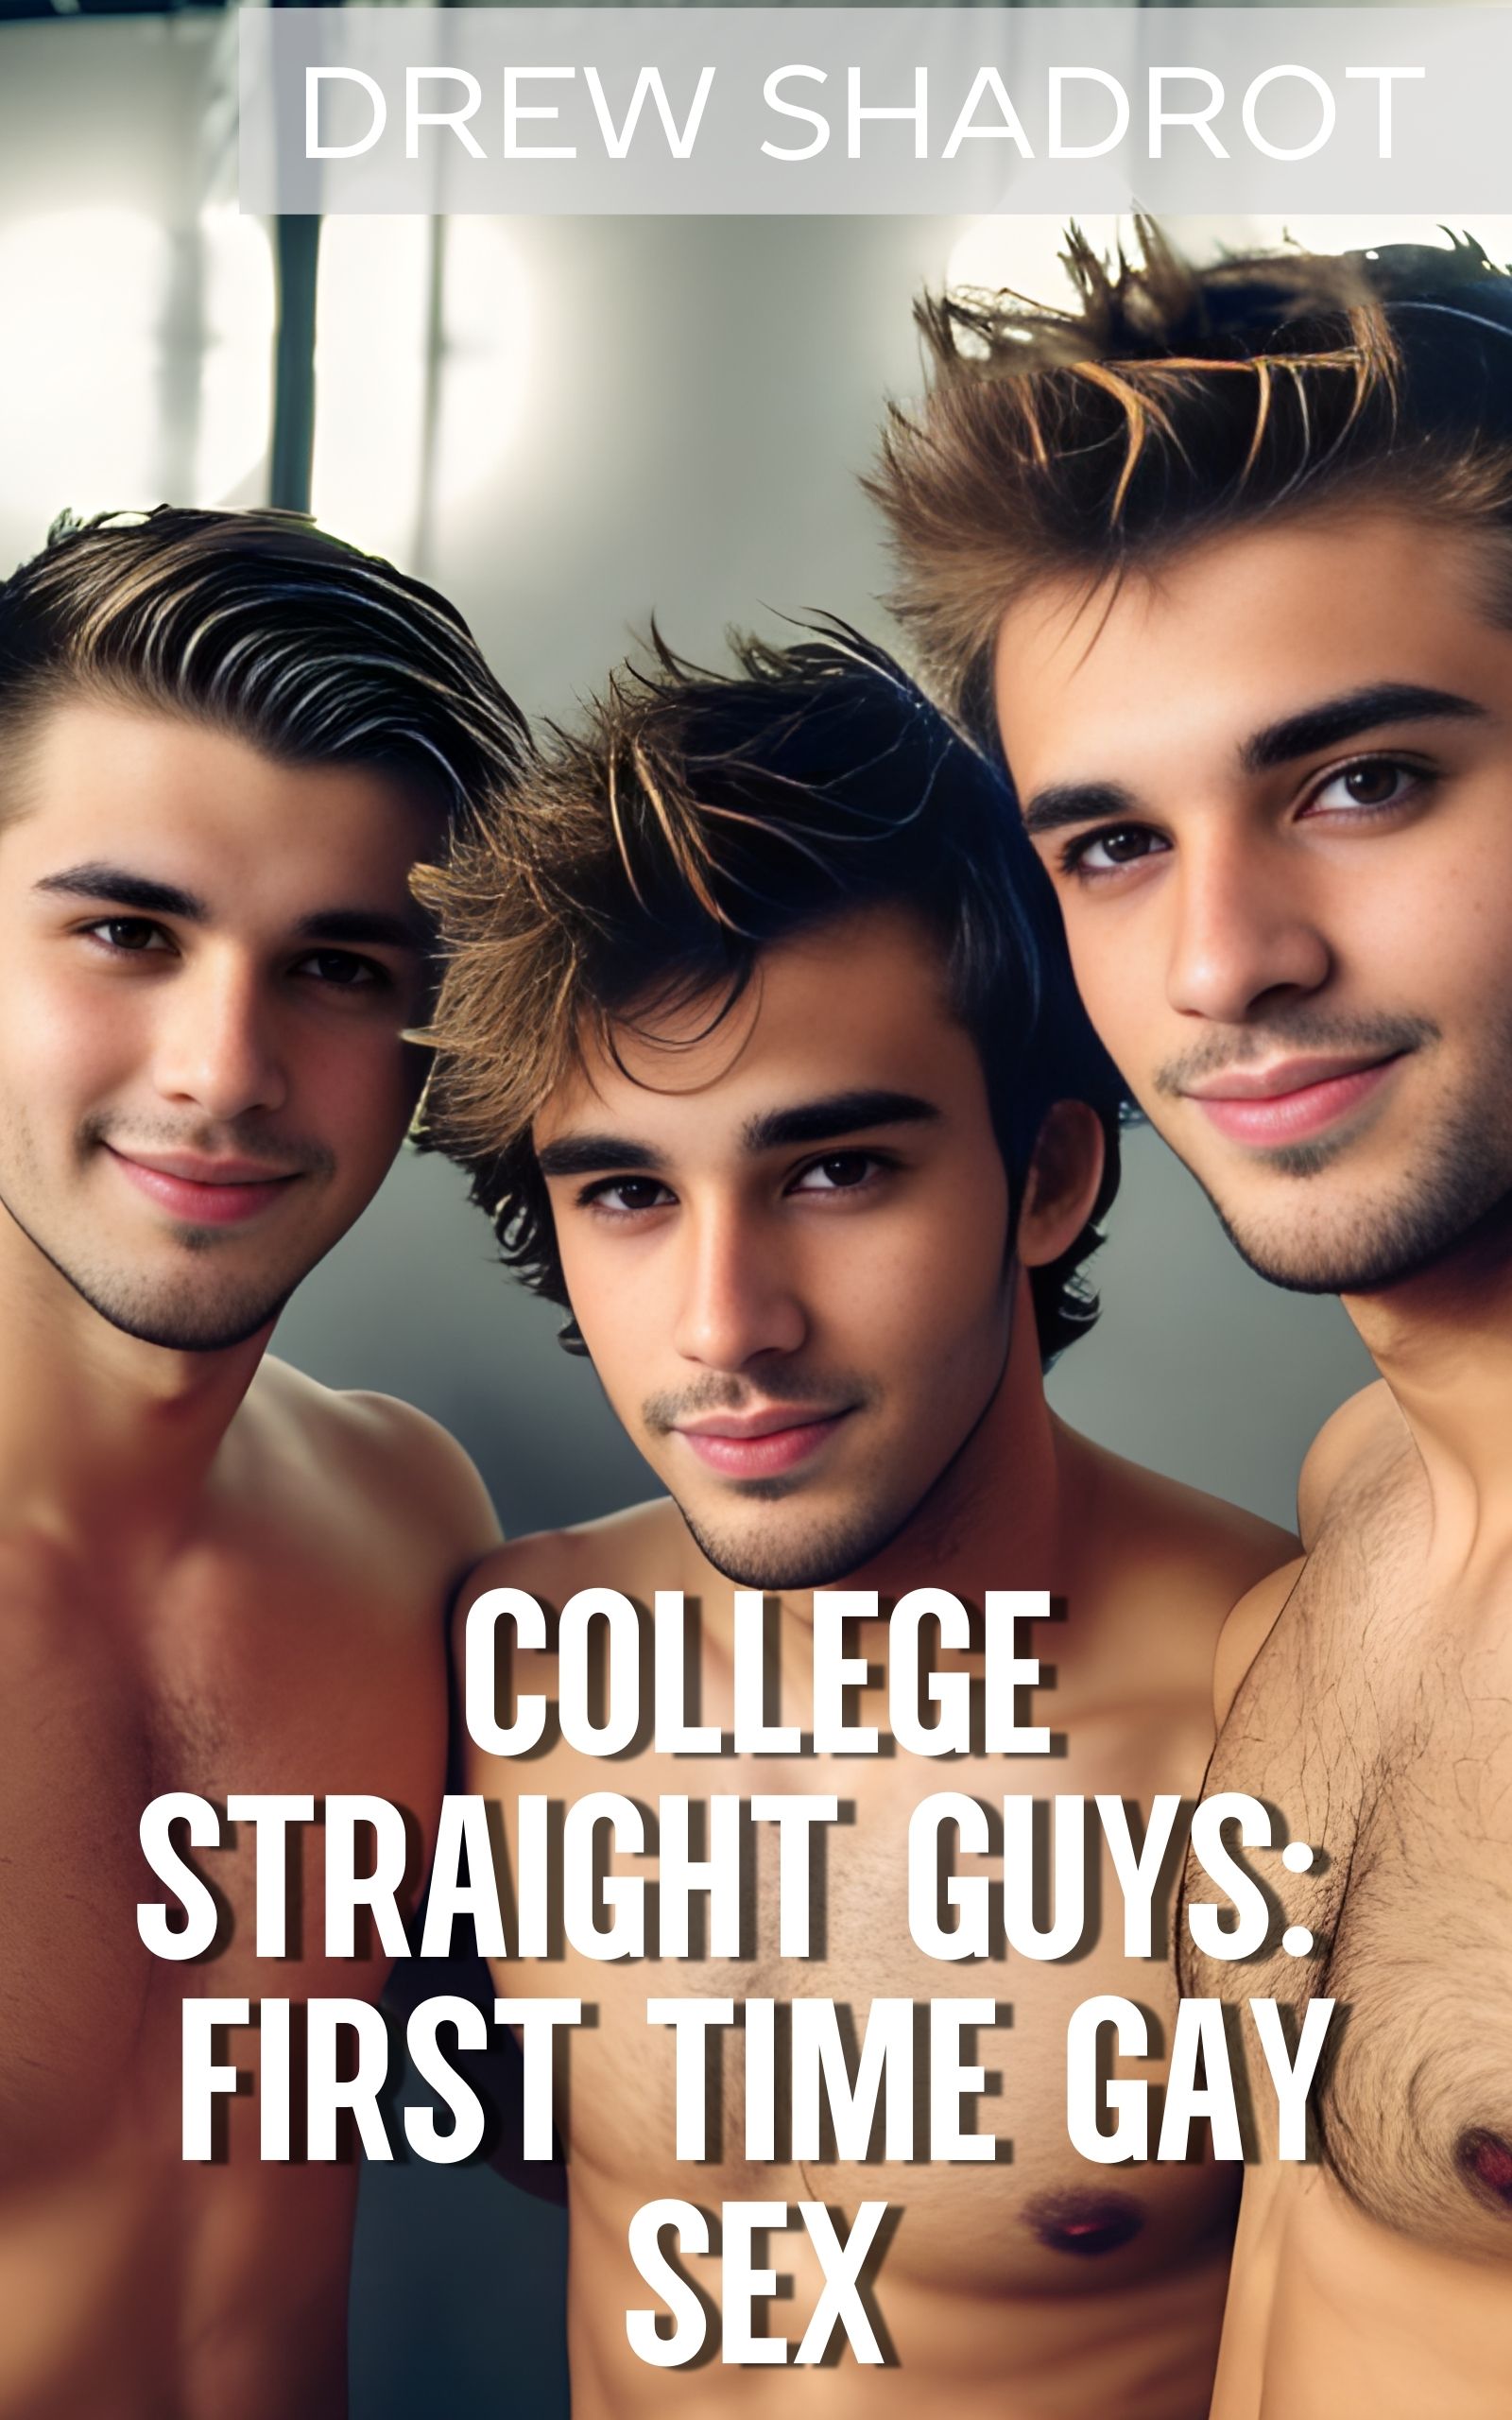 The “College Straight Guys: First Time Gay Sex” Collection